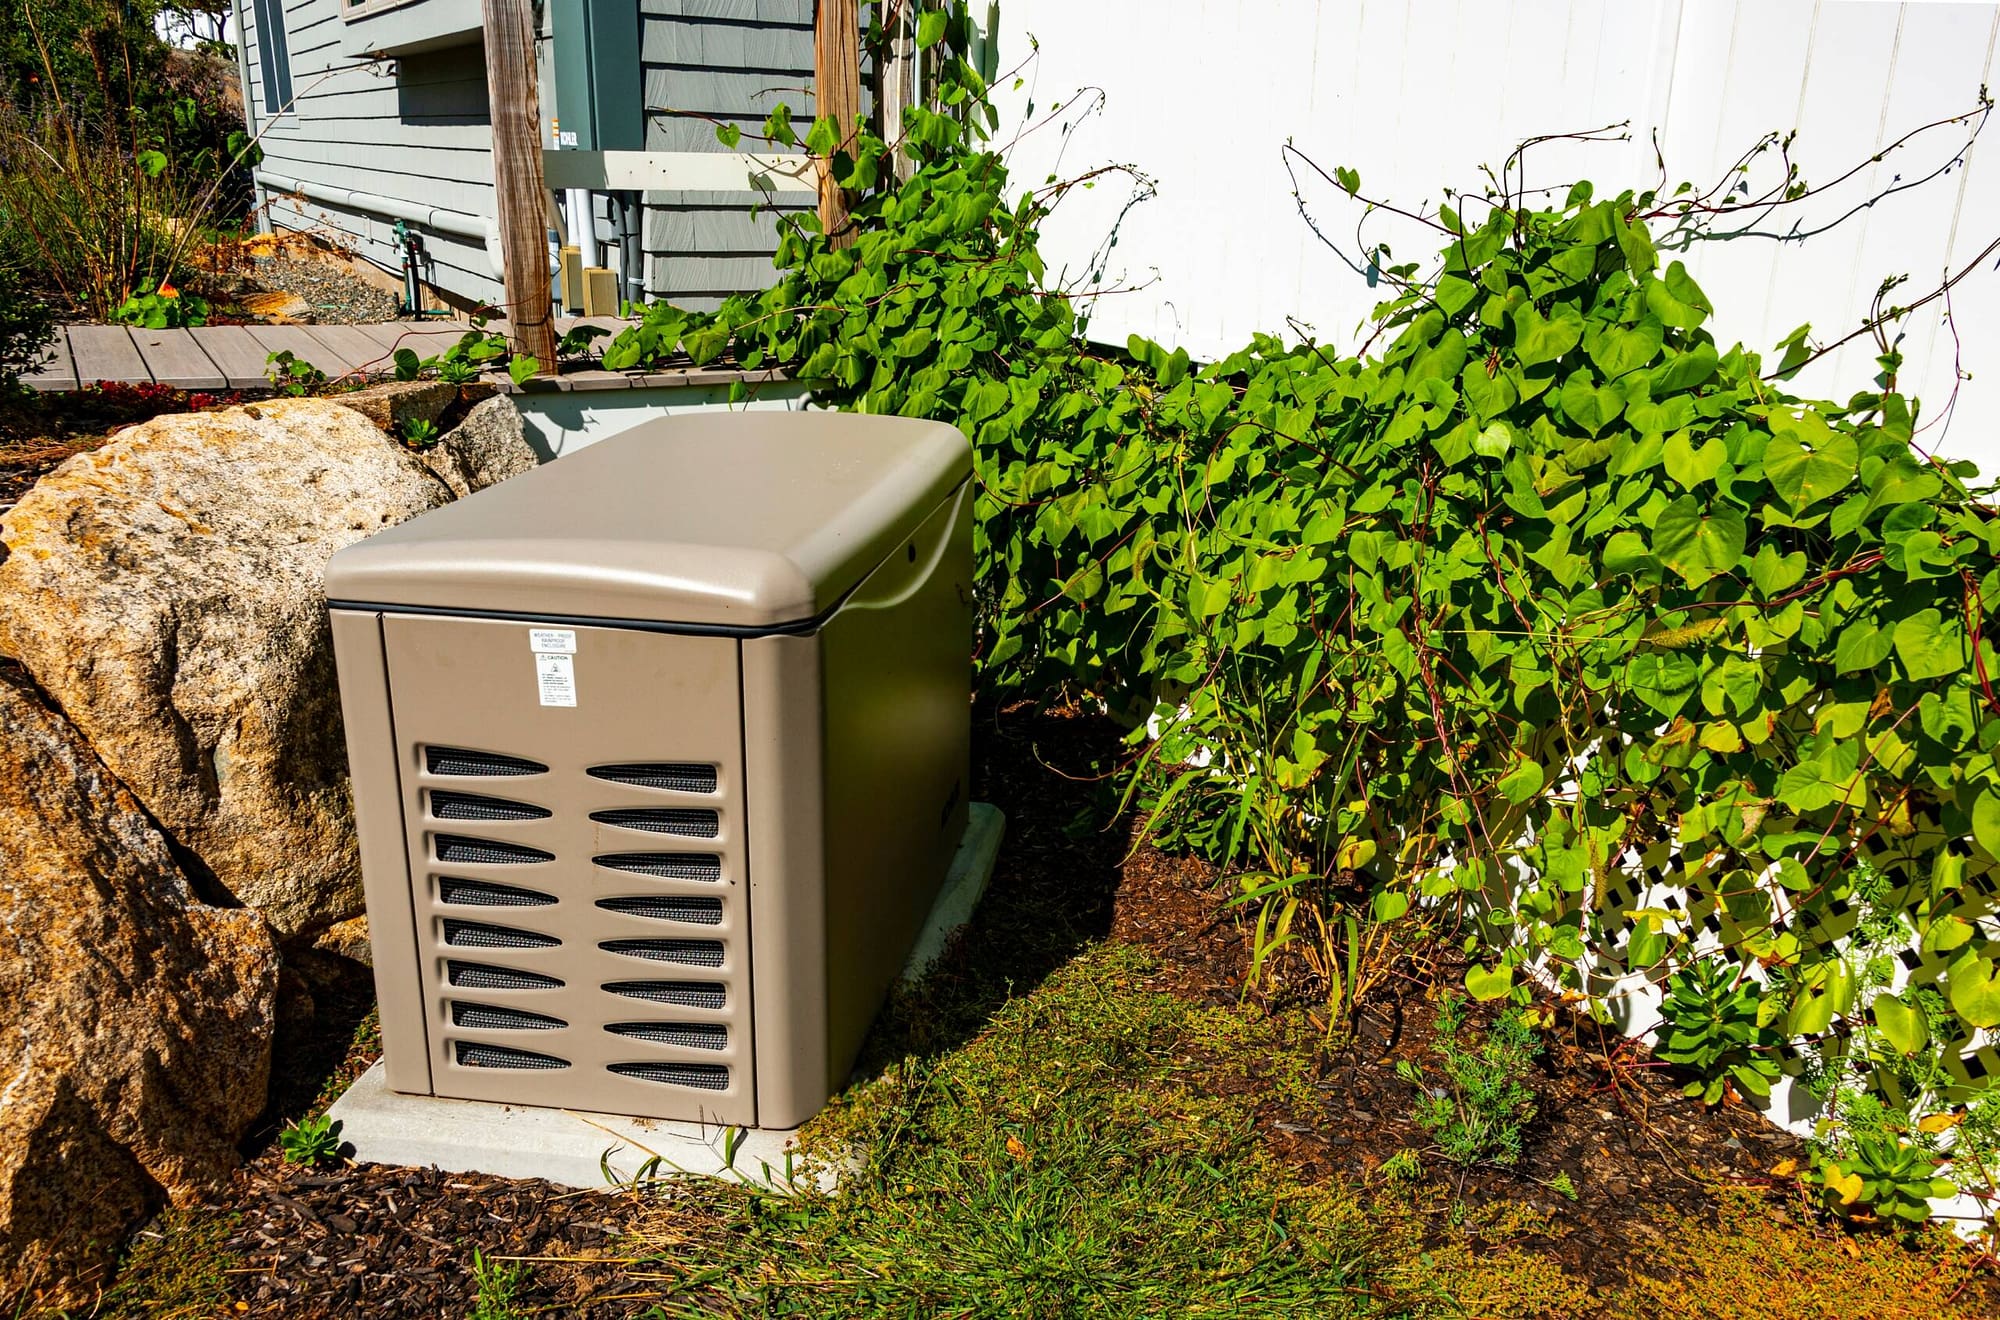 A residential generator, between ivy and large rocks, after the residential generator installation process.